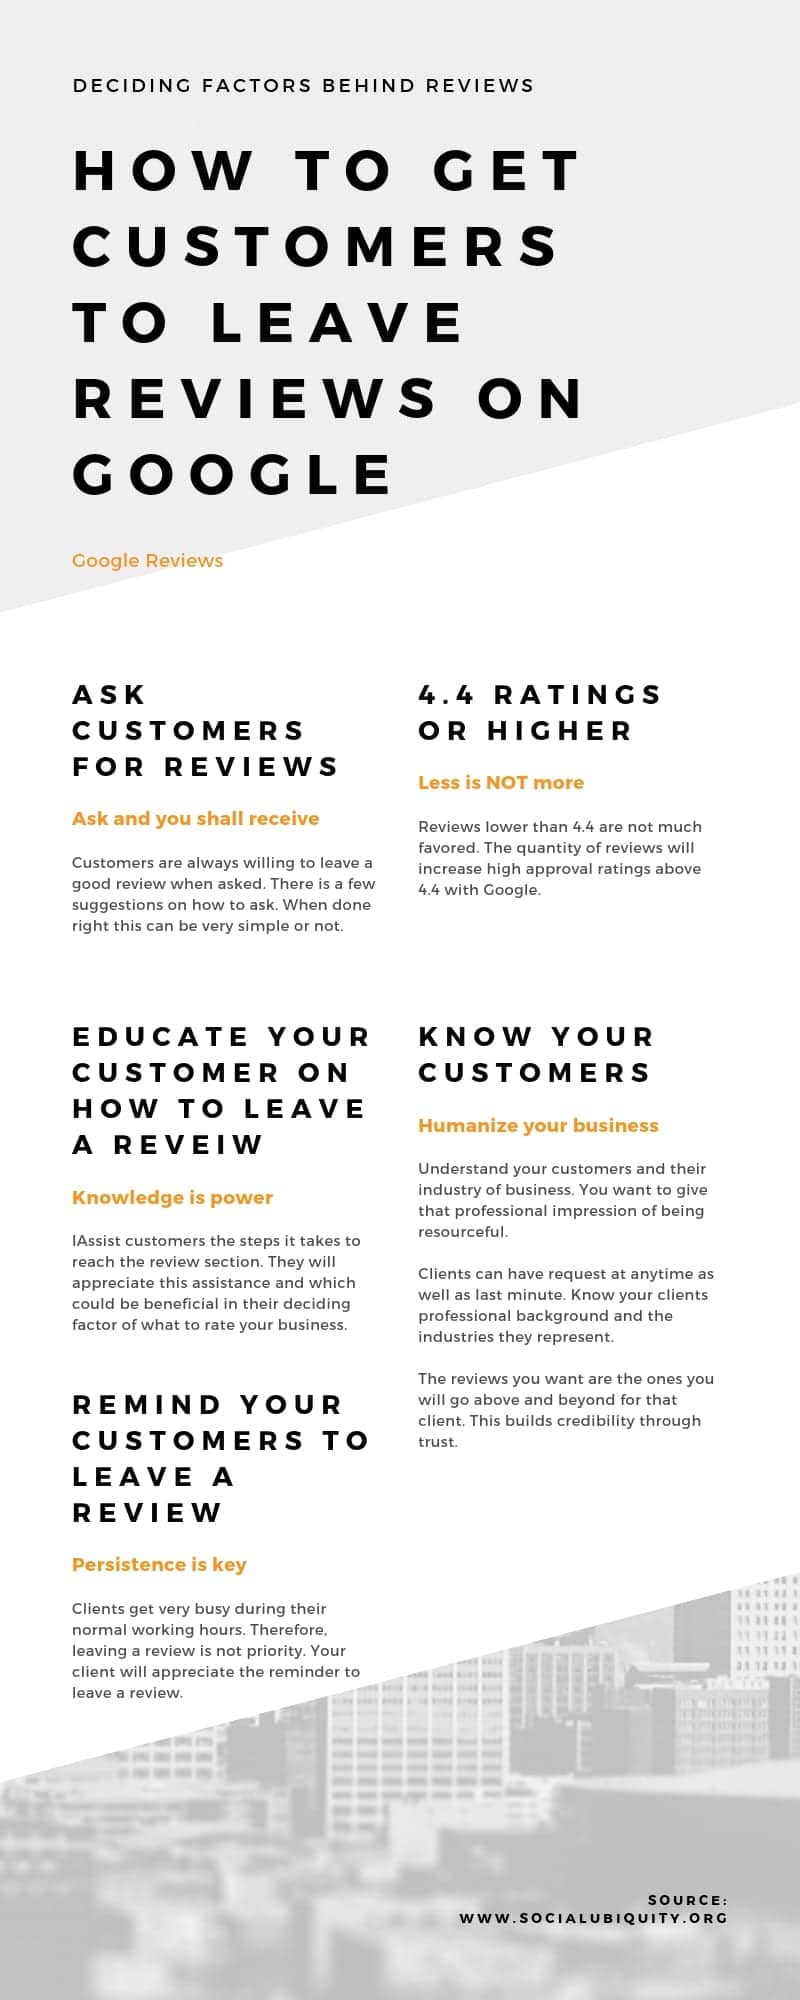 How to get customers to leave reviews on Google